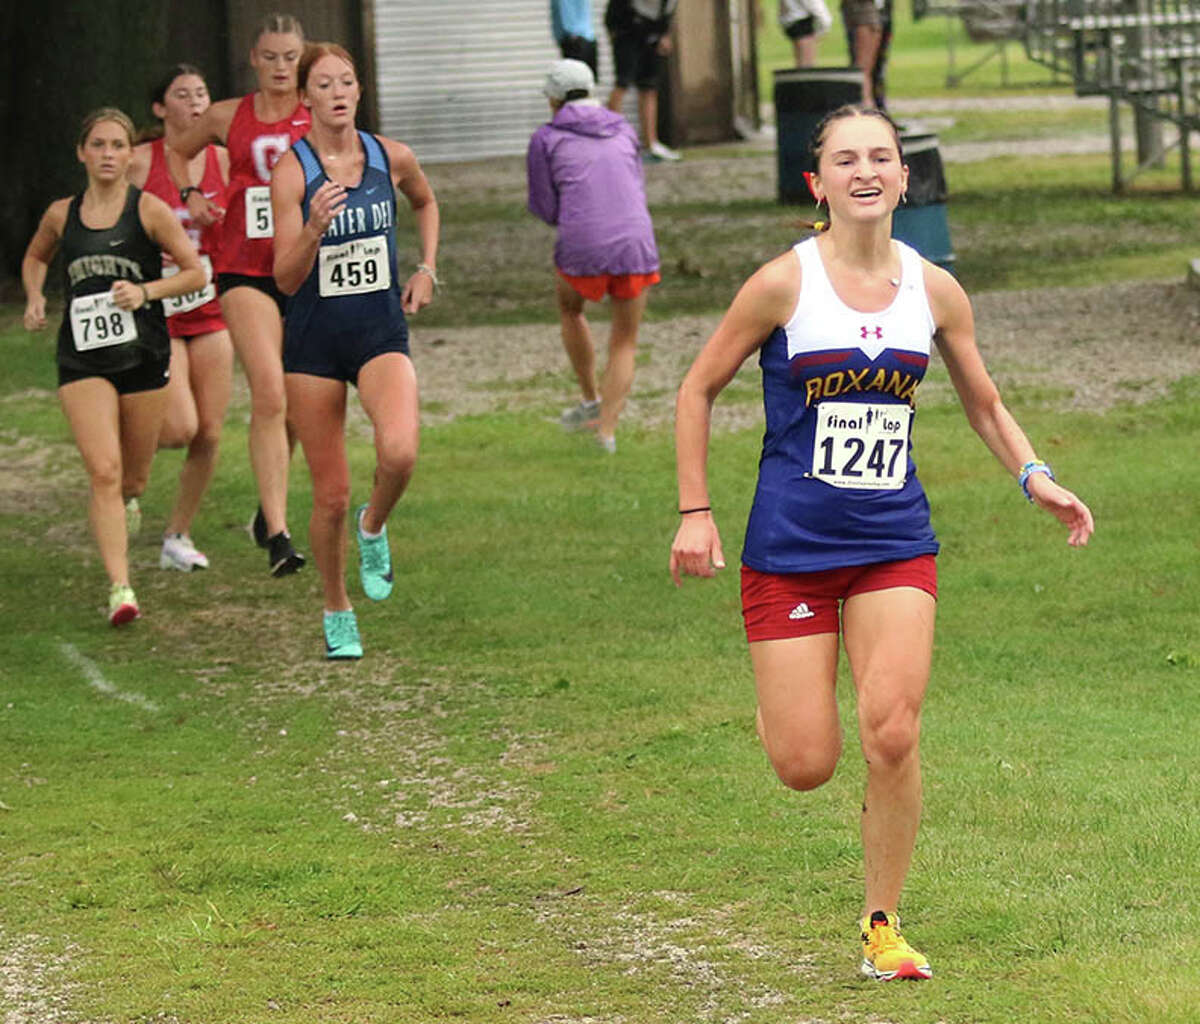 Roxana's Gabrielle Woodruff (right) runs the final 200 meters in her medal-winning race in the Granite City Robinson/Lang Invitational on Saturday at Wilson Park.